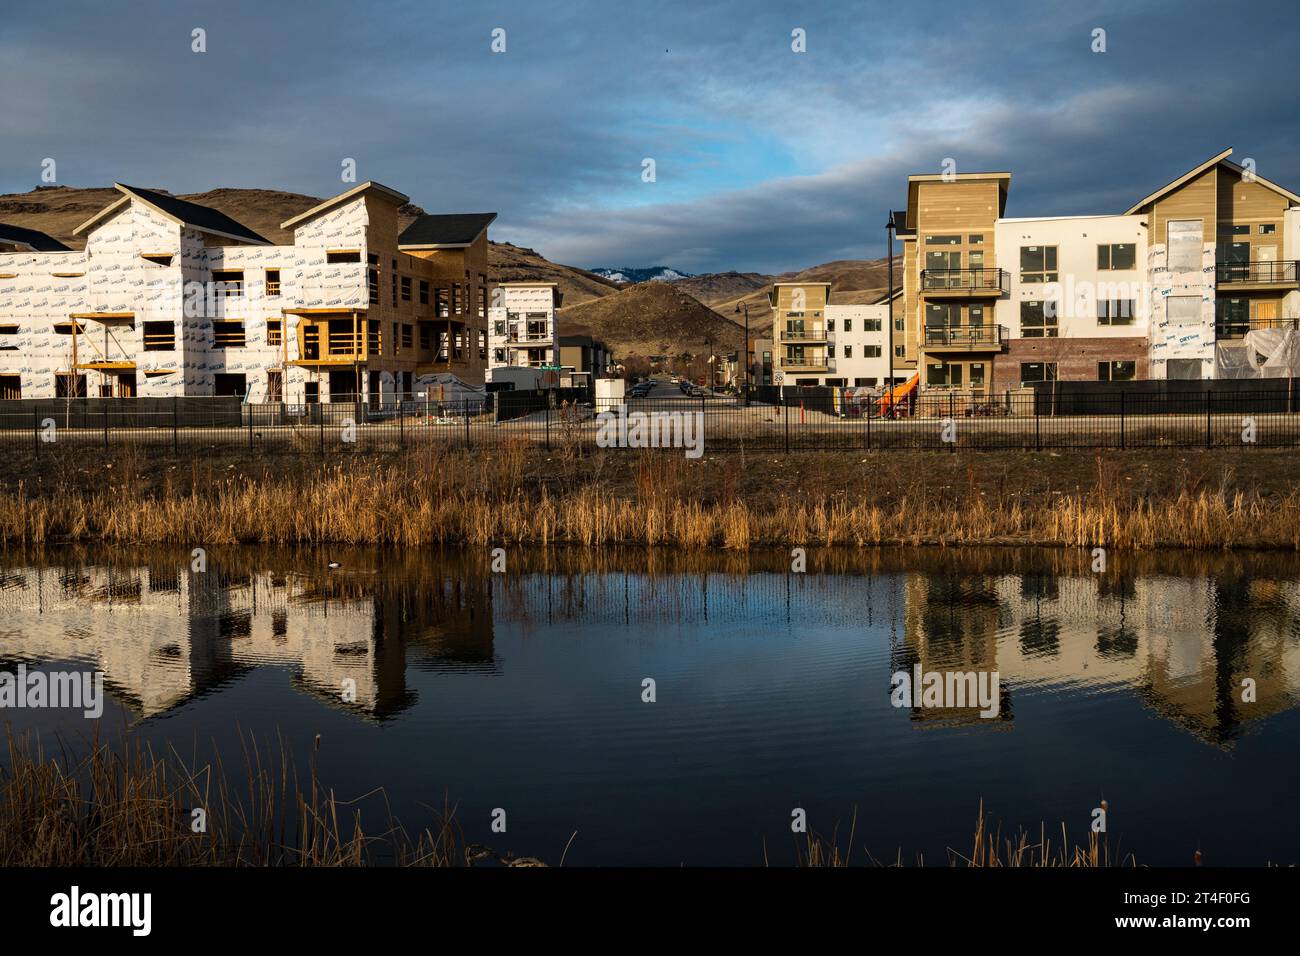 Multi-family residential construction at the Harris Ranch Development. Stock Photo